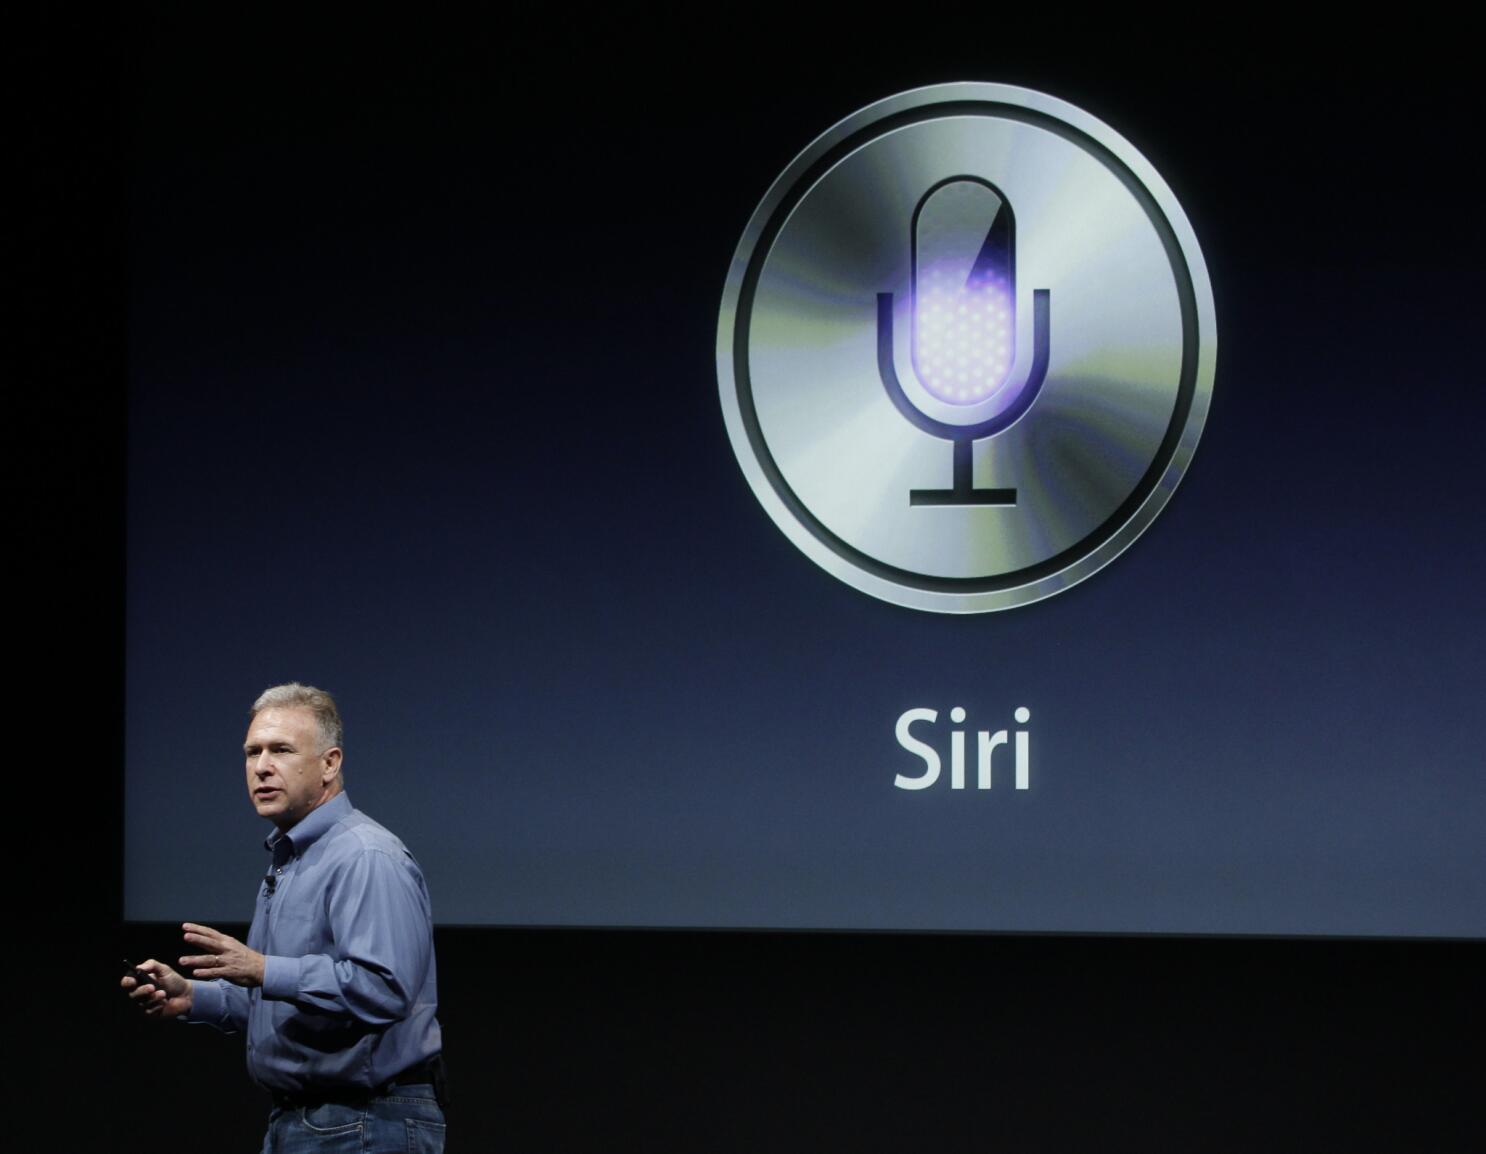 Apple contractors 'regularly hear confidential details' on Siri recordings, Apple